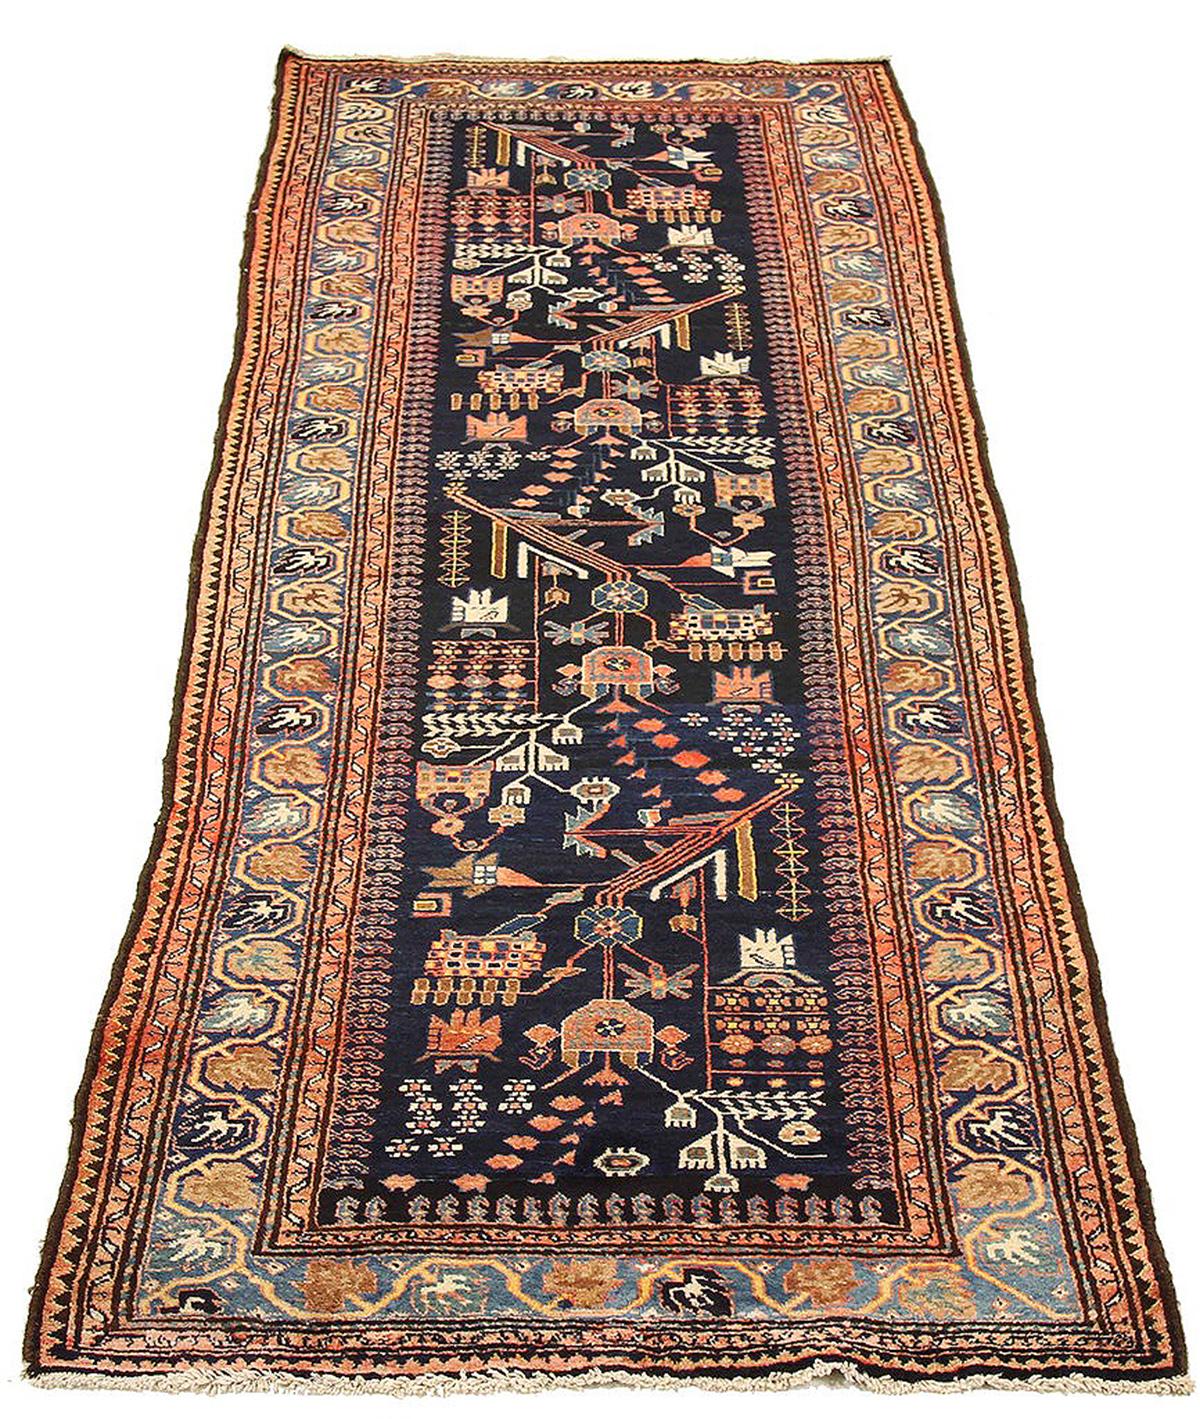 Hand-Woven 1900s Antique Persian Malayer Runner Rug with Floral Motifs Allover For Sale